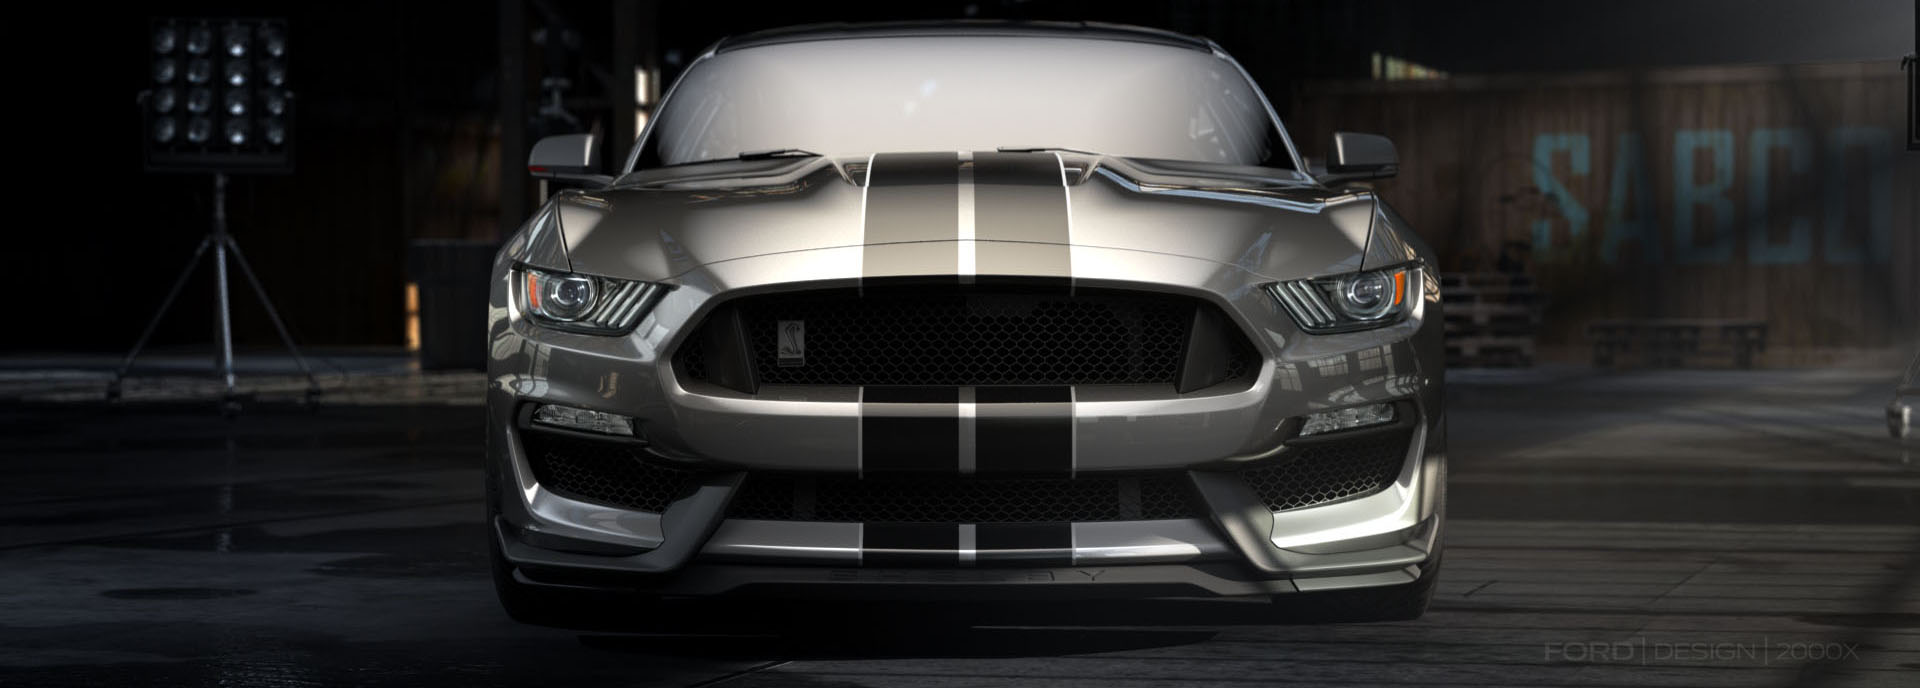 Ford Mustang Shelby GT350 photo #3